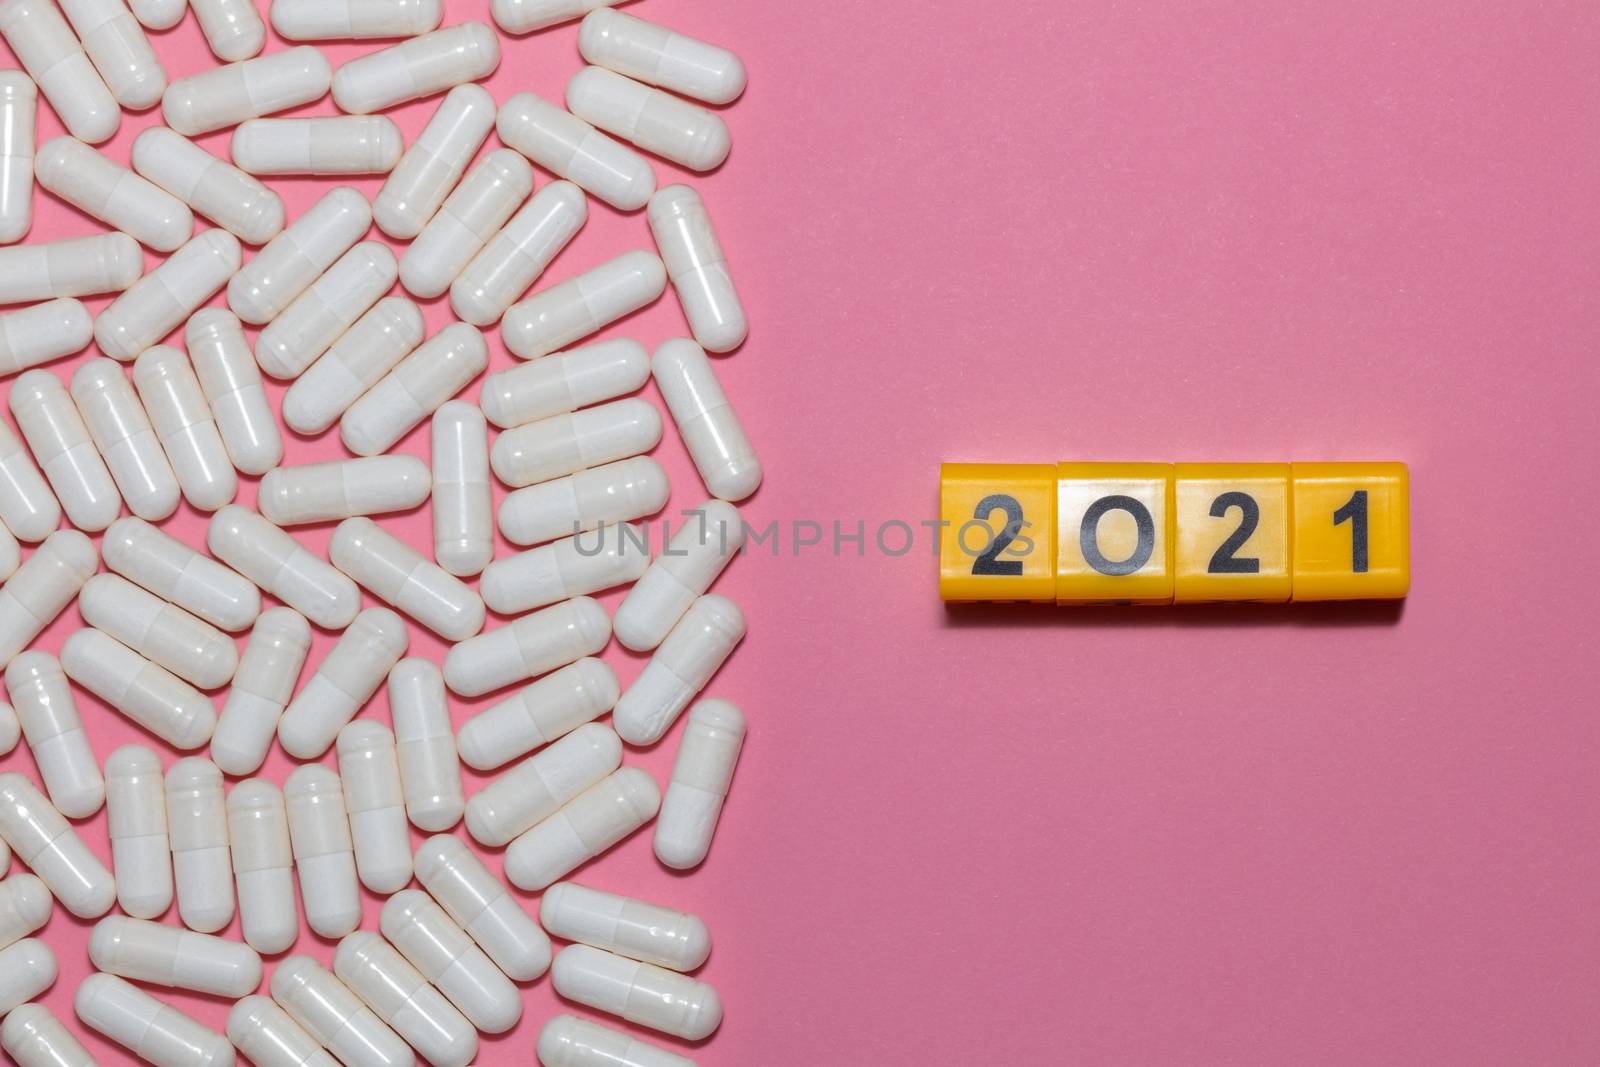 Top view of white pills on pink background with copy space. Yellow cubes with black digits form 2021 next to the pills. Healthcare, medical and pharmaceutical concept. New normal and reality concept.